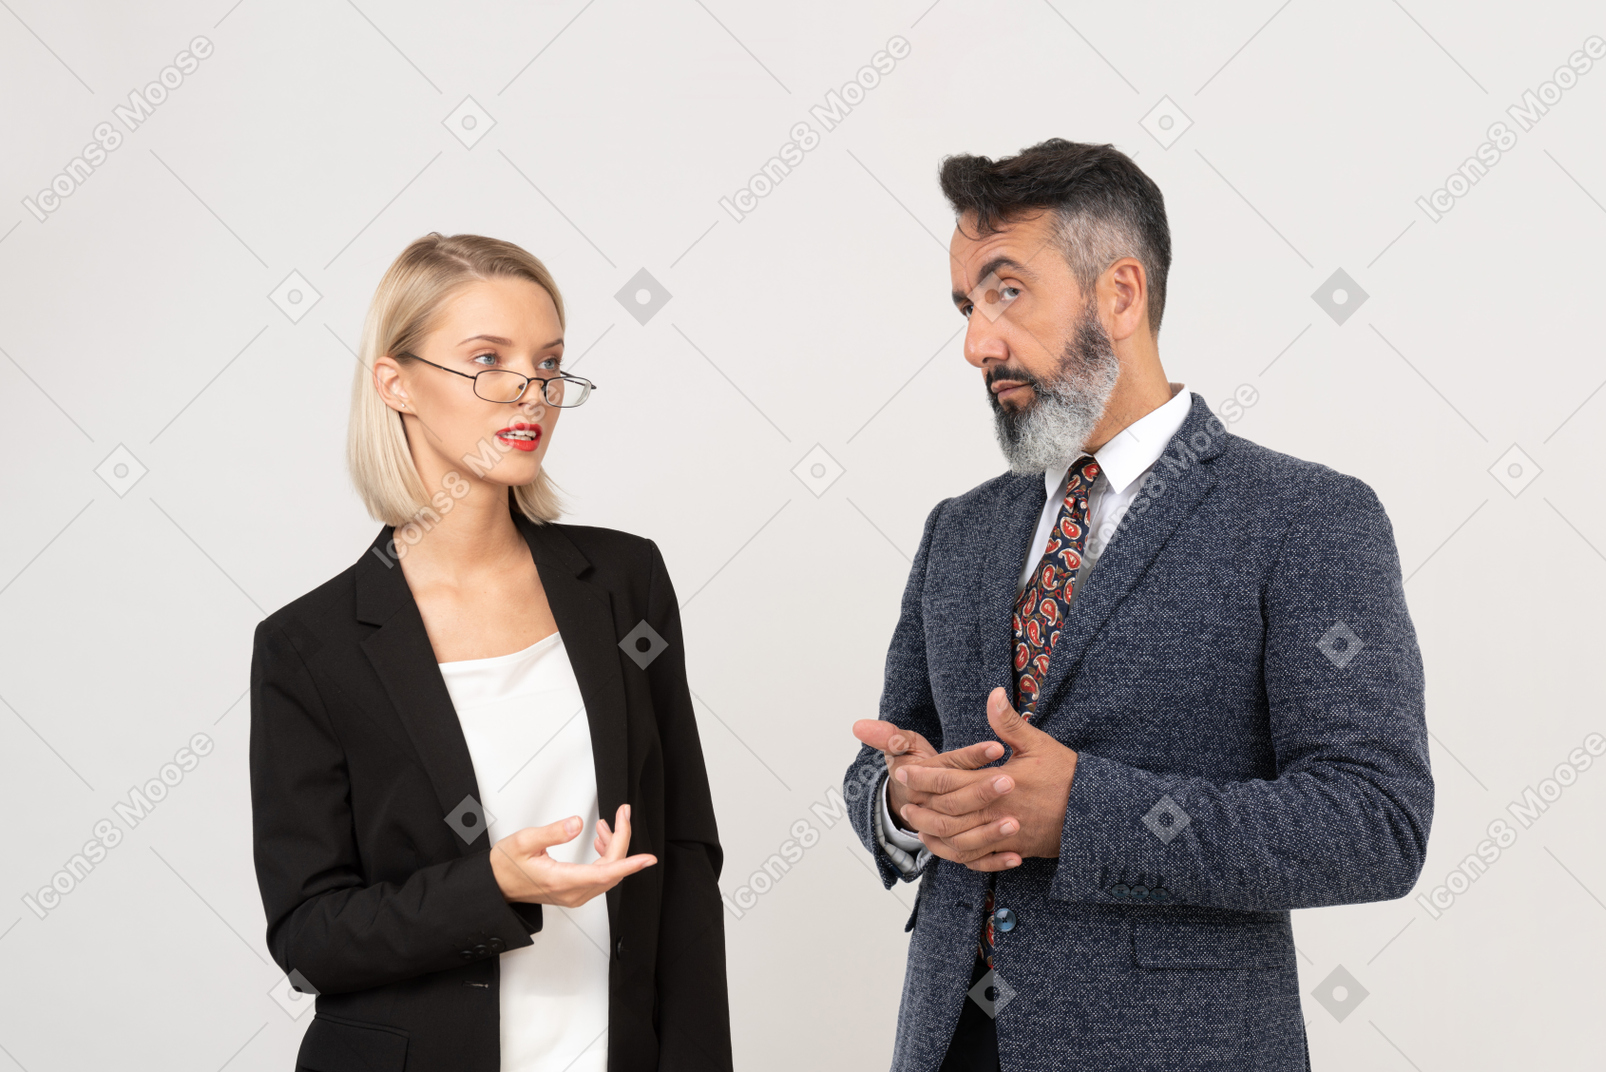 Employee trying to strike with her best ideas to boss